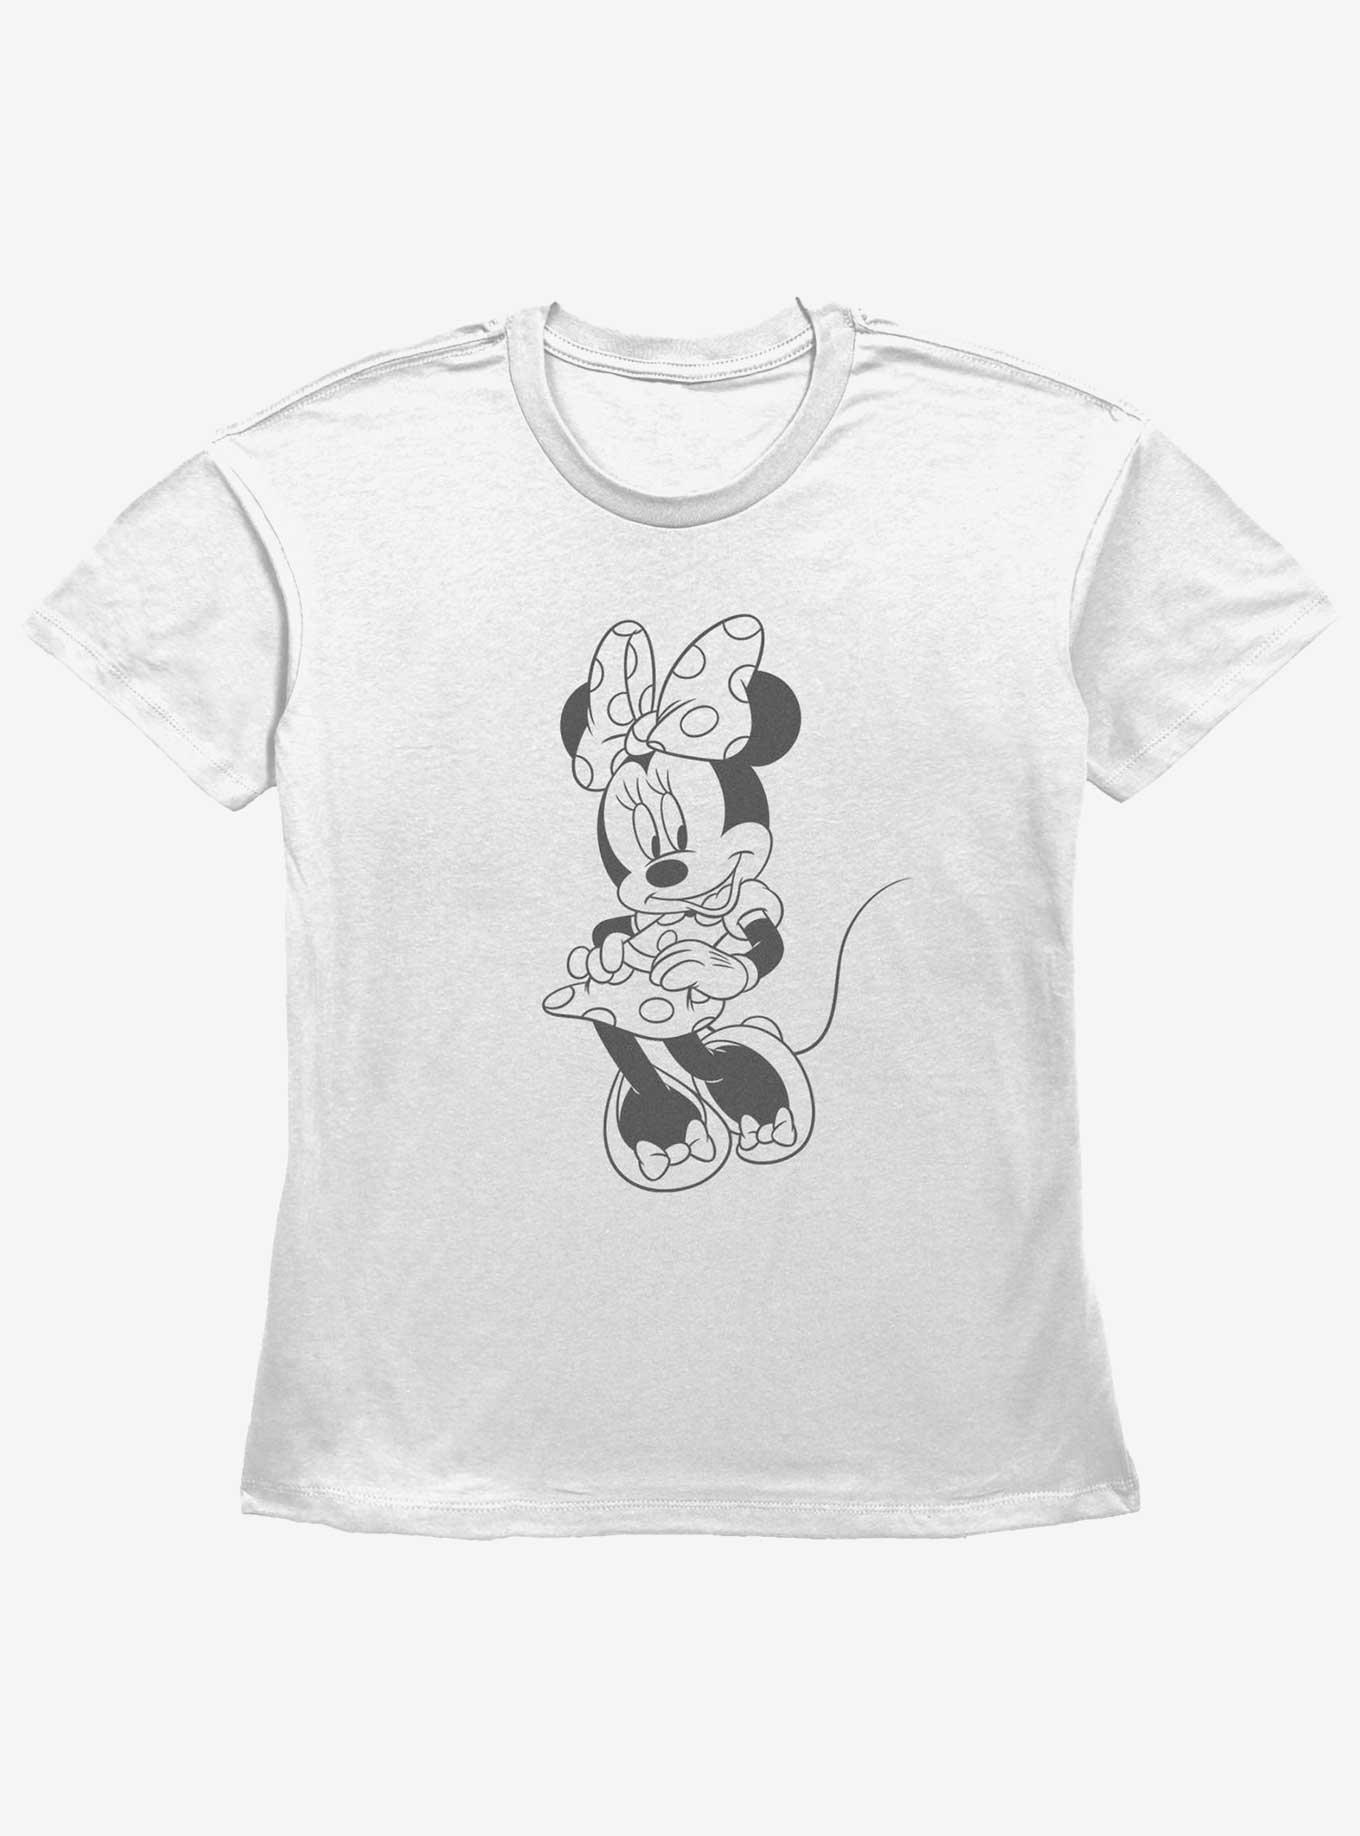 Disney Minnie Mouse Sweet Minnie Girls Straight Fit T-Shirt, WHITE, hi-res